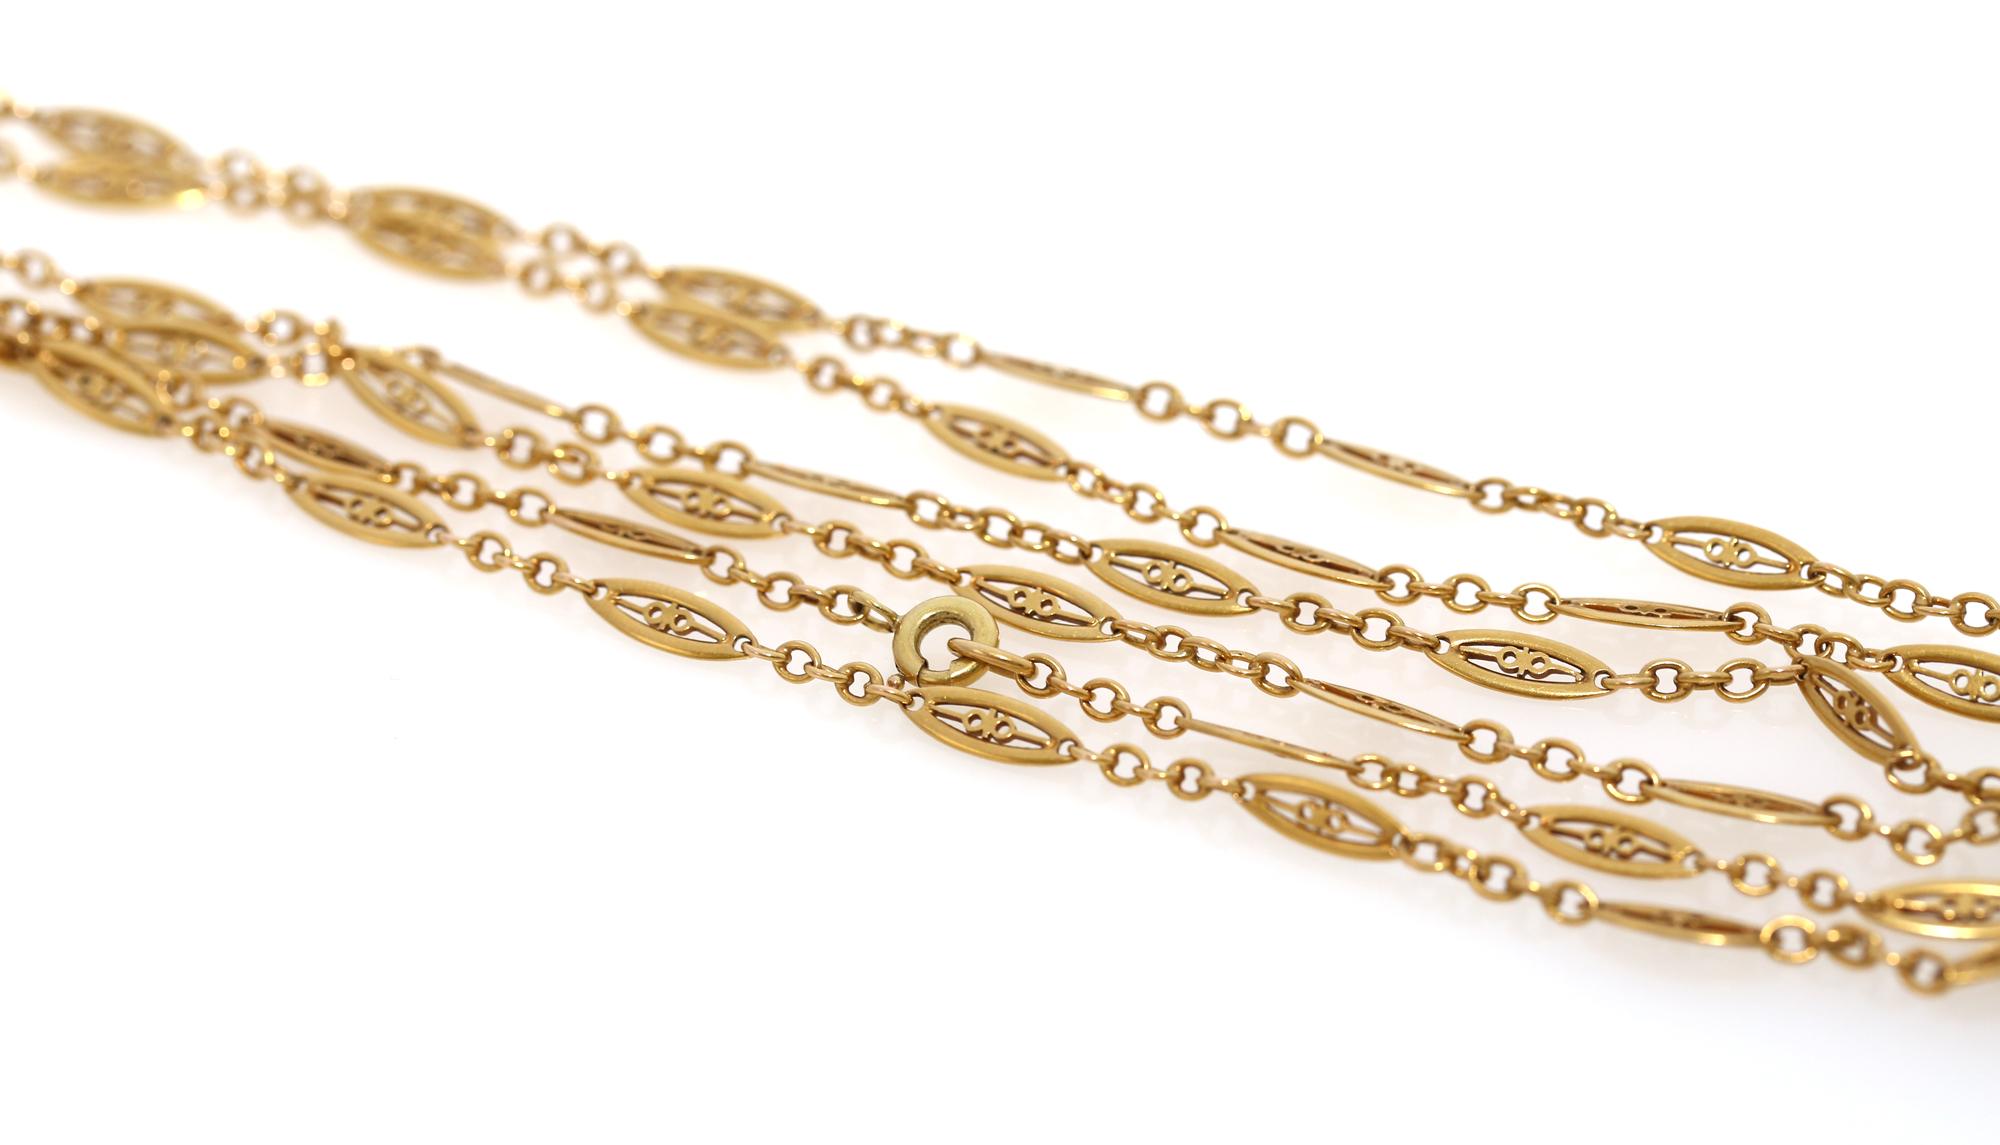 Women's or Men's Antique French 18 Karat Yellow Gold Chain Necklace